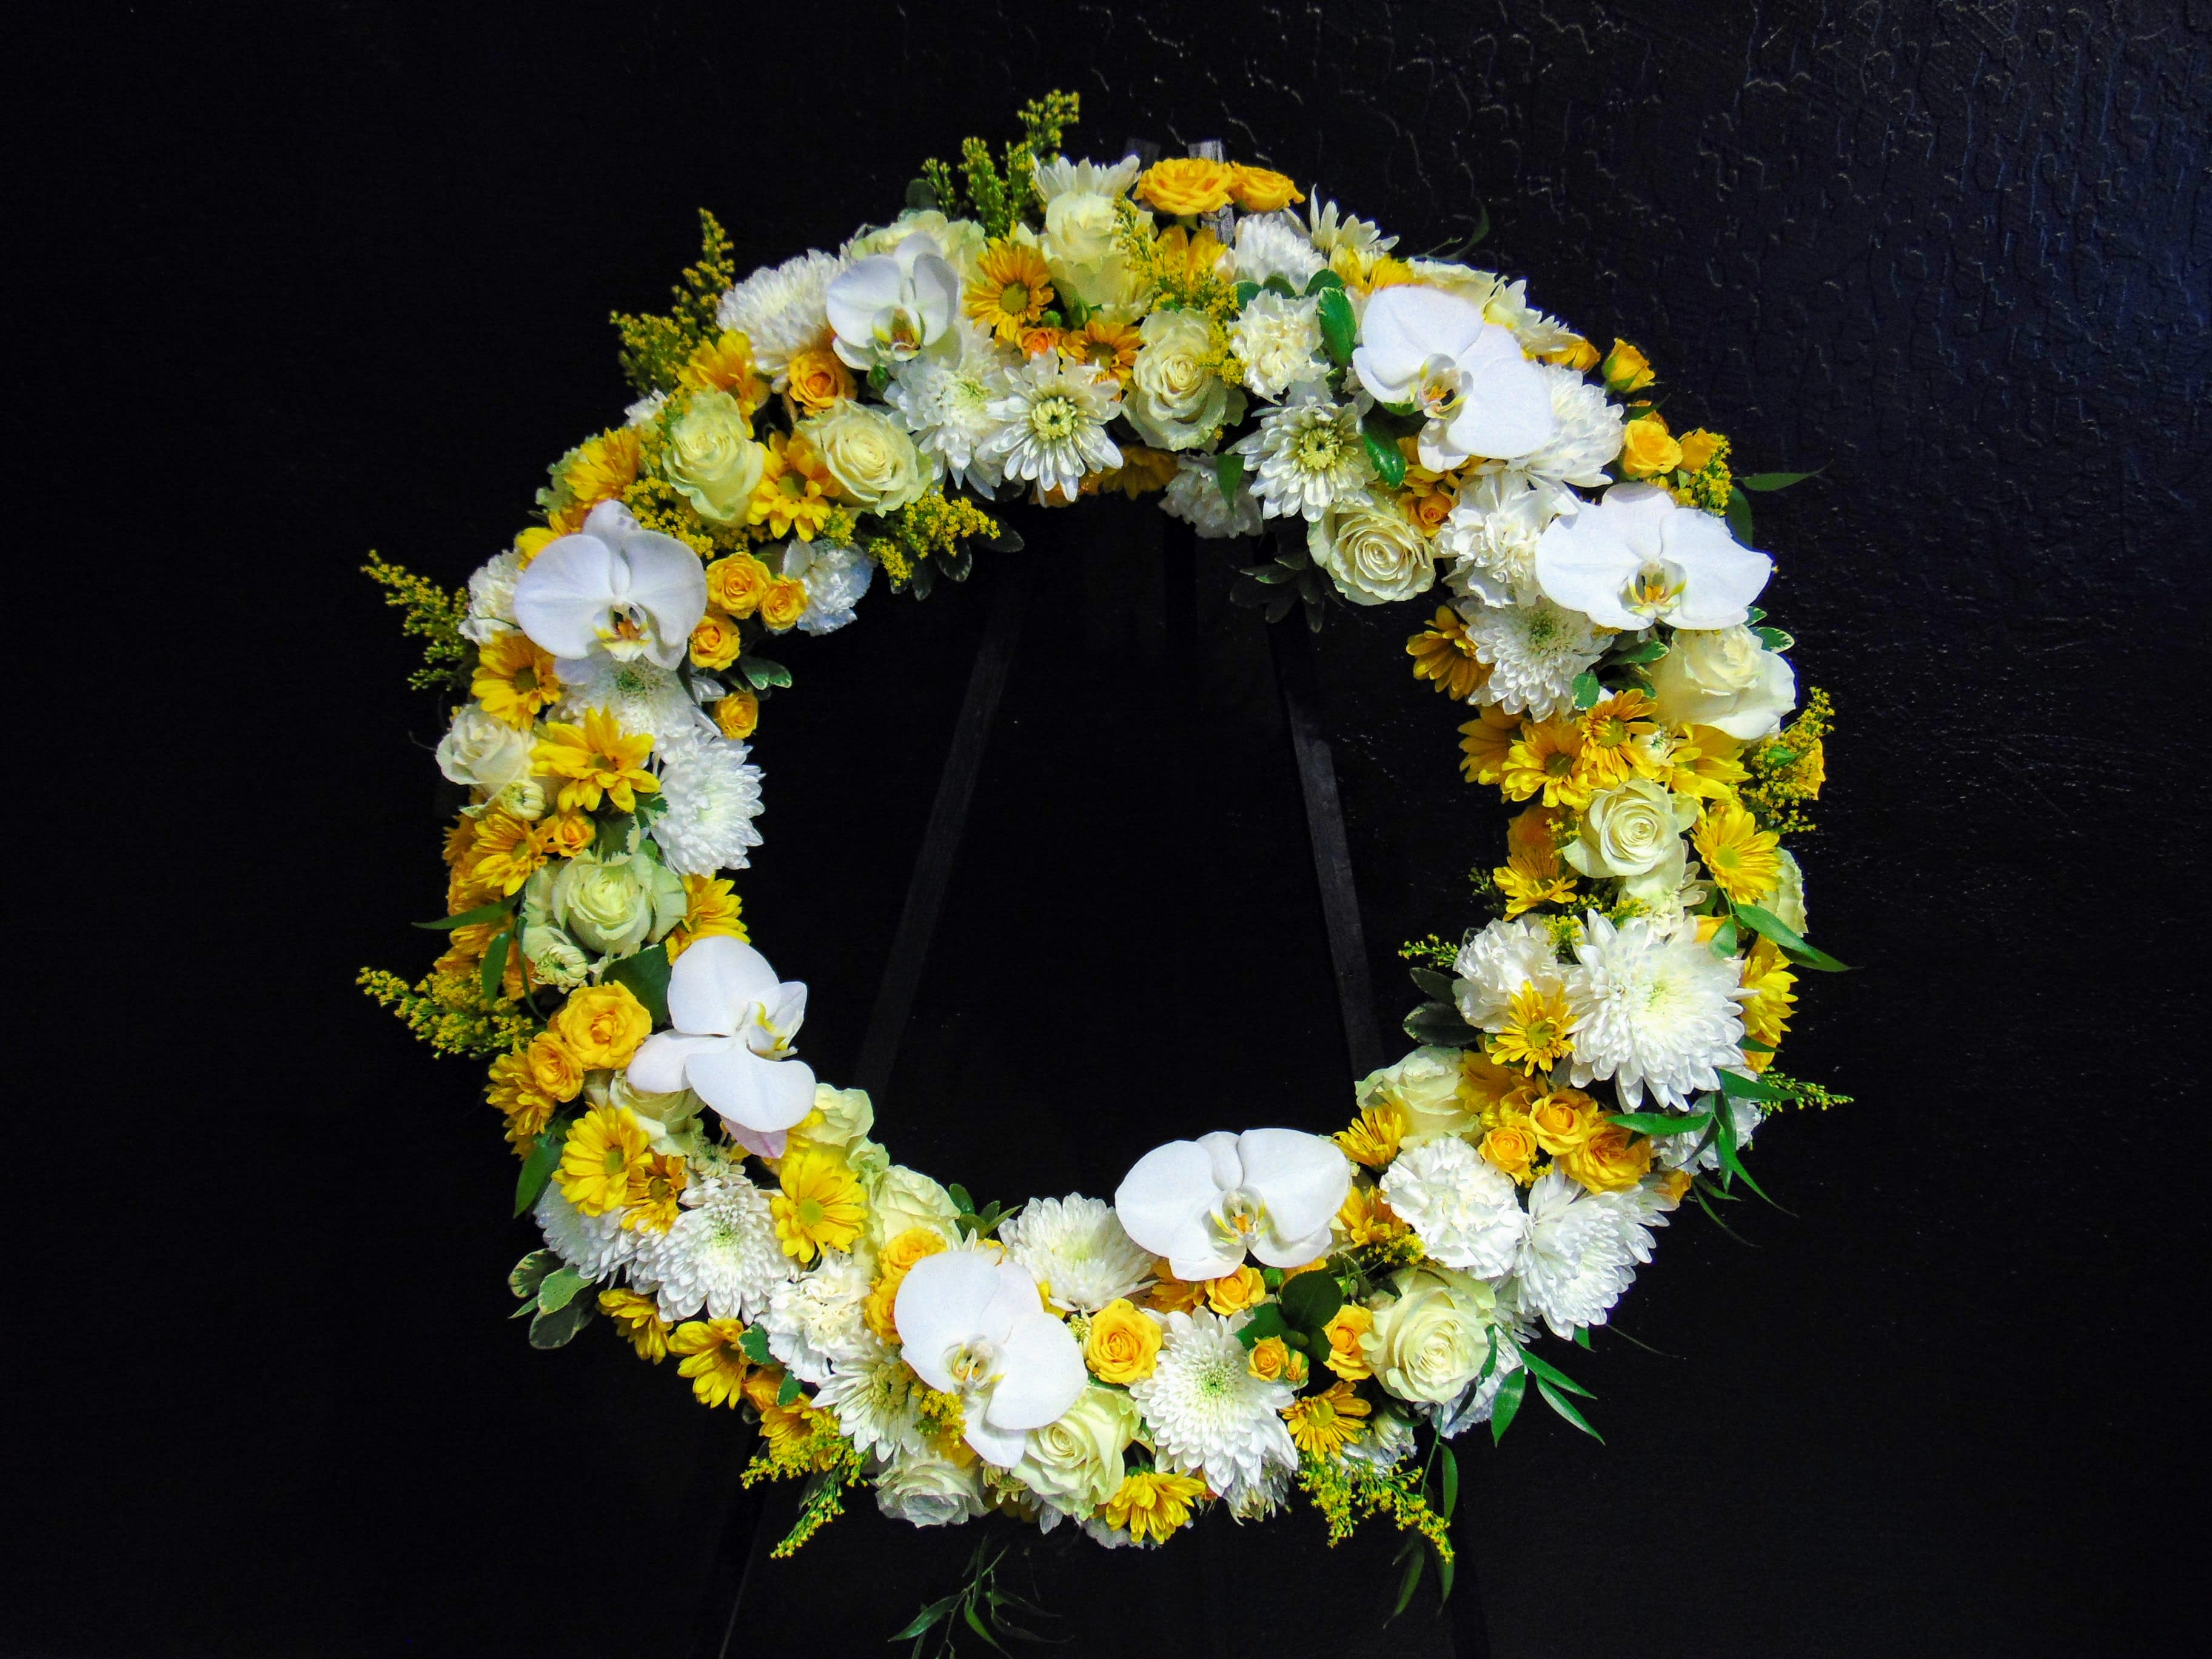 Graceful Wreath - This design is part of our sympathy collection. The softer colors in this design evoke sweet and thoughtful memories. A base of mixed seasonal flowers with accents of orchid blossoms. Pictured is the Deluxe option at 24&quot;.